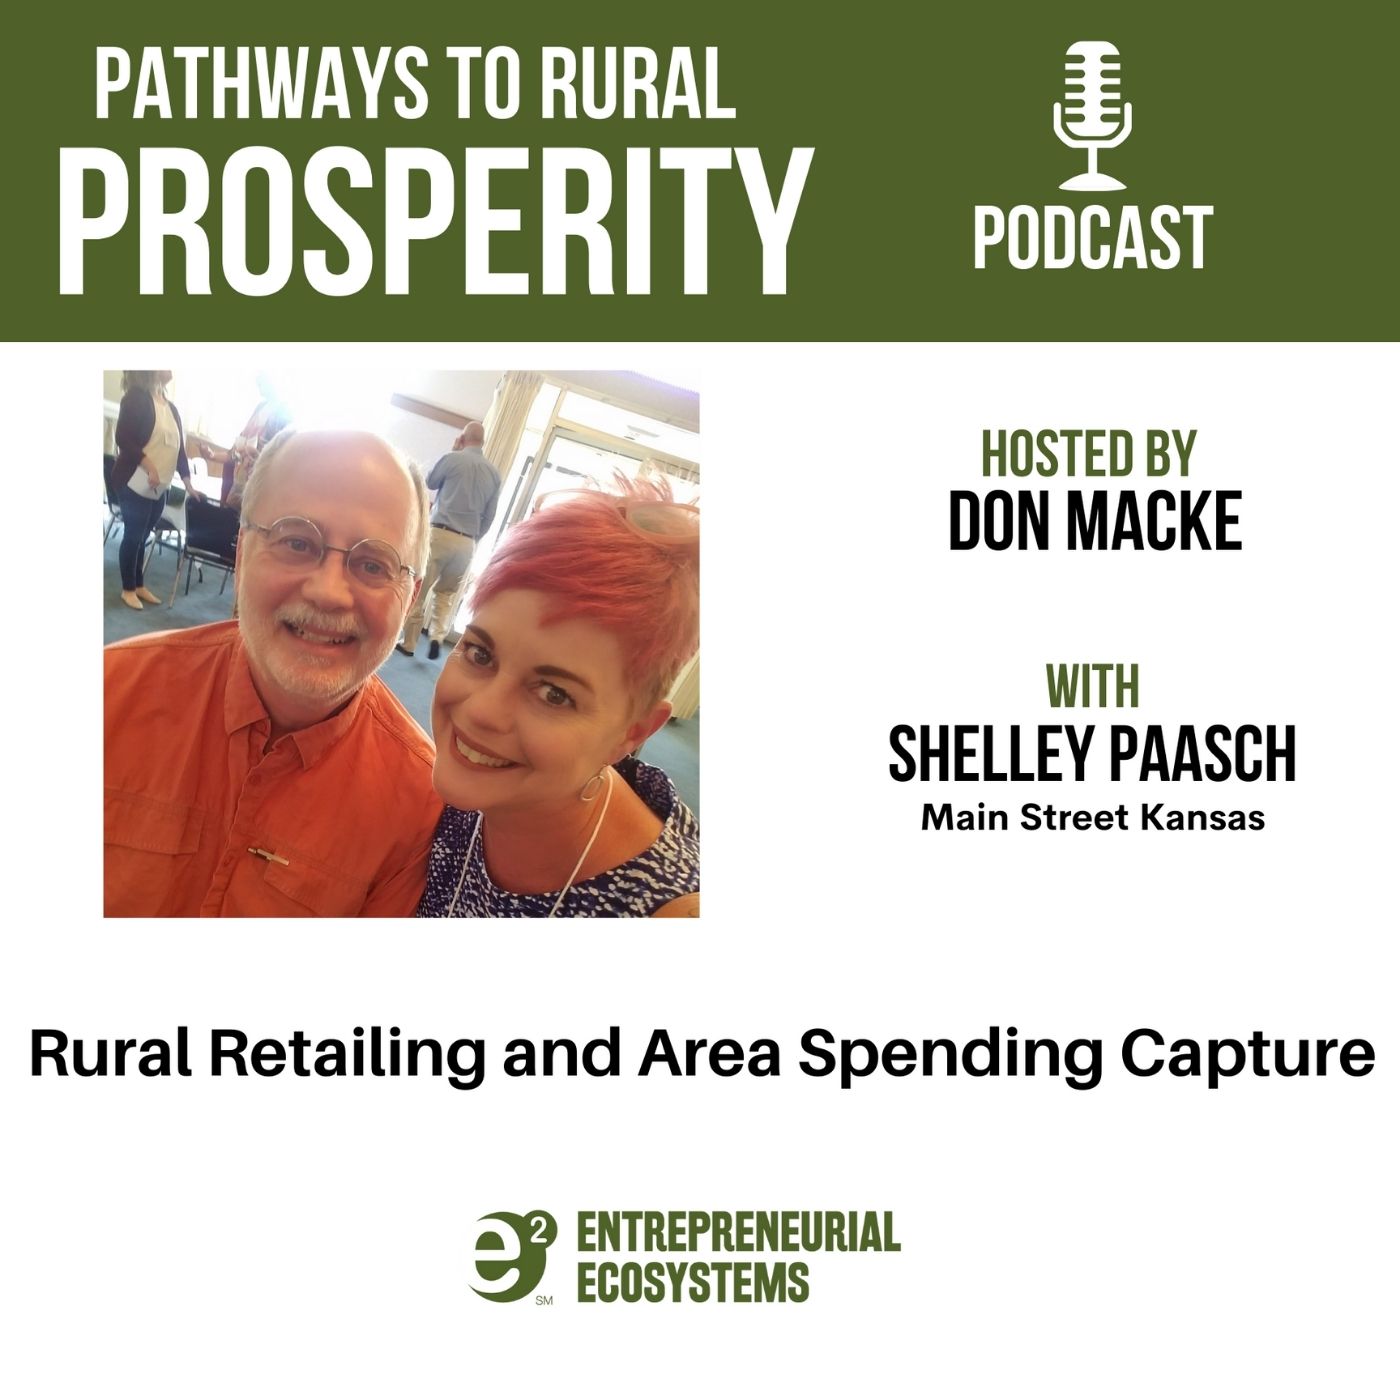 Artwork for podcast Pathways to Rural Prosperity with Don Macke